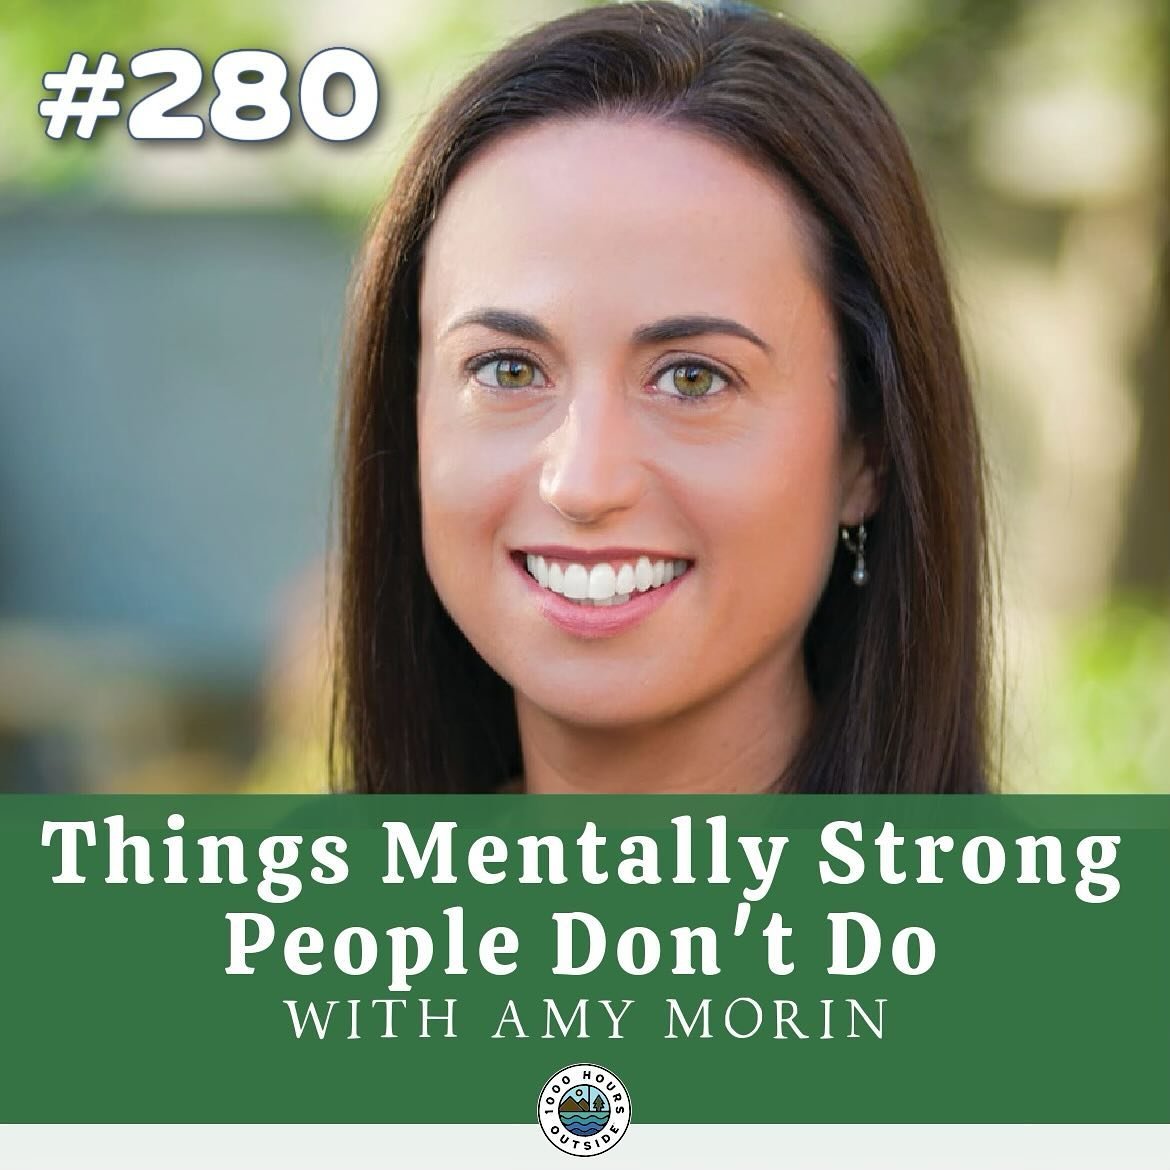 Learn more about mental strength ➡️ with @amymorinauthor !! 

She joined us from her SAILBOAT that she had lived on for many years! Amy shares about some major losses snd hardships she has had in her life and how mental strength can help us manage th